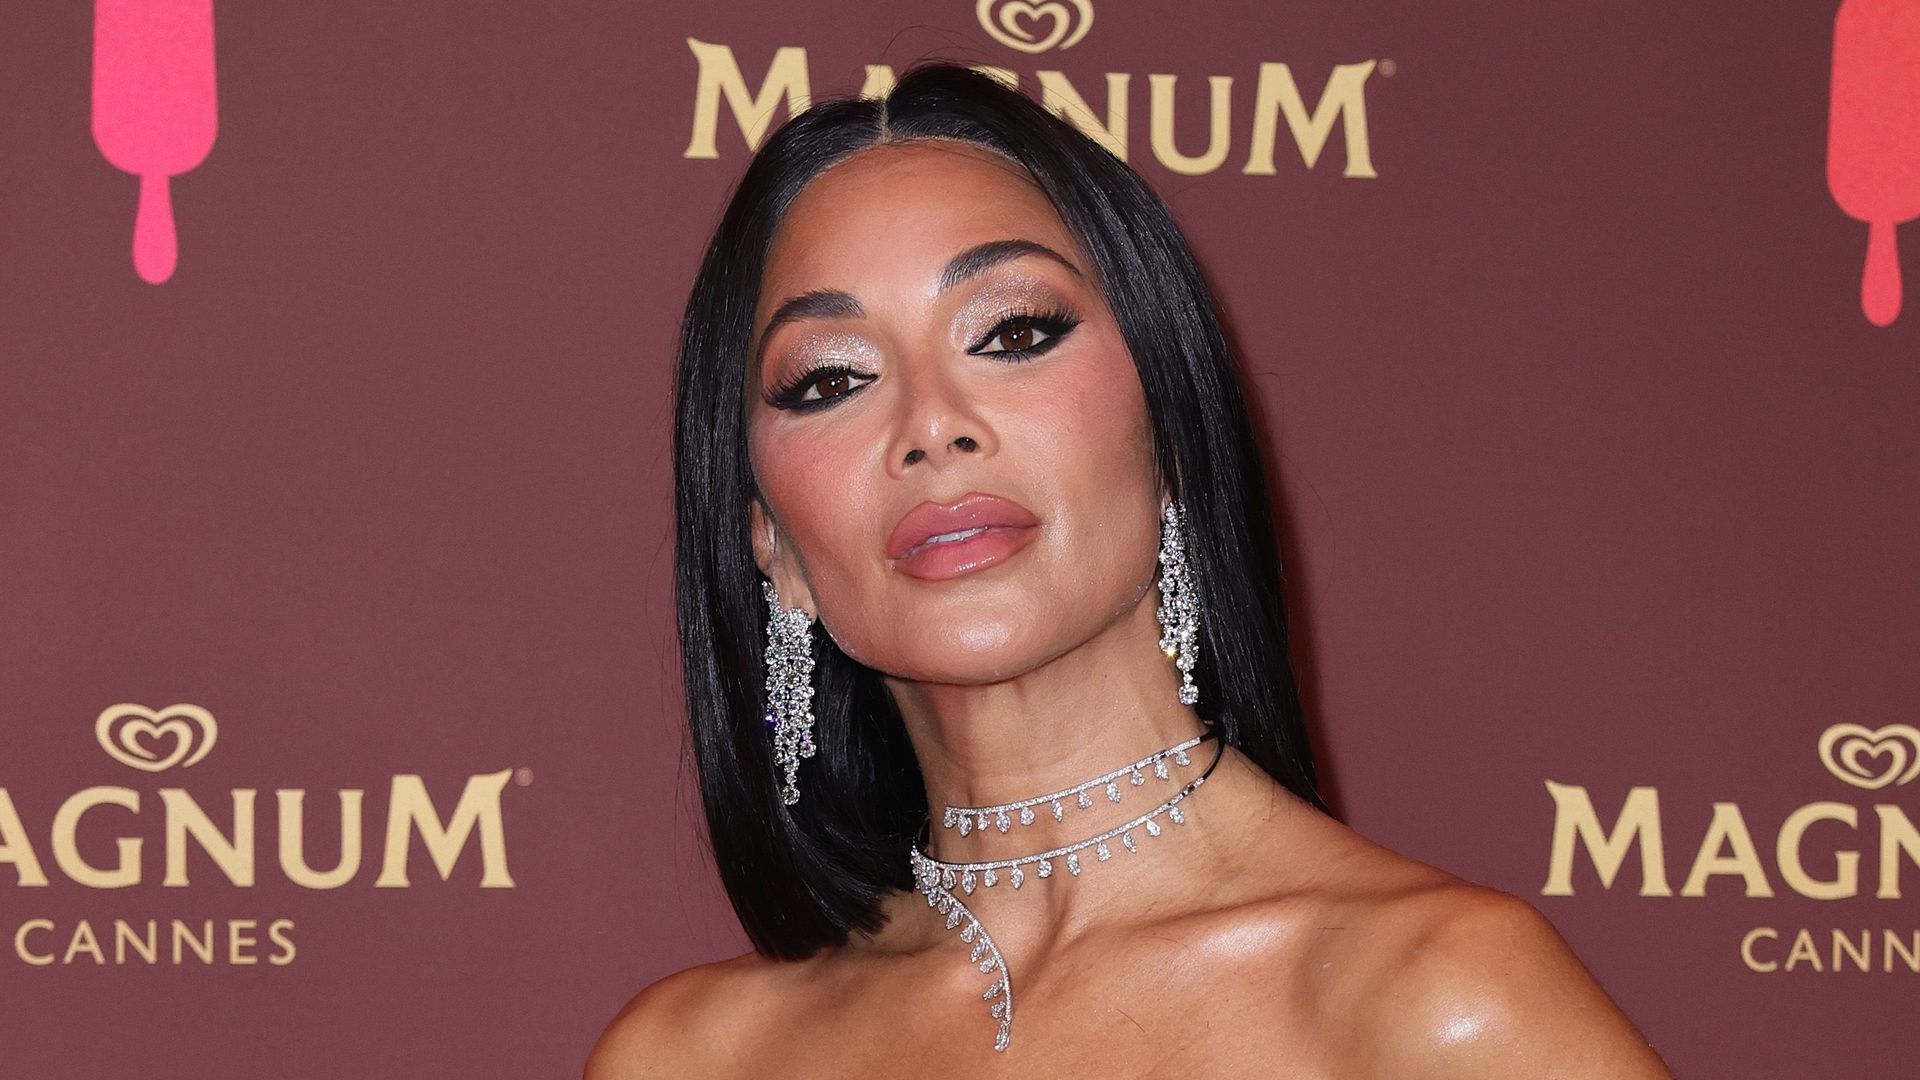 Nicole Scherzinger shows off insanely statuesque physique in plunging sequin catsuit